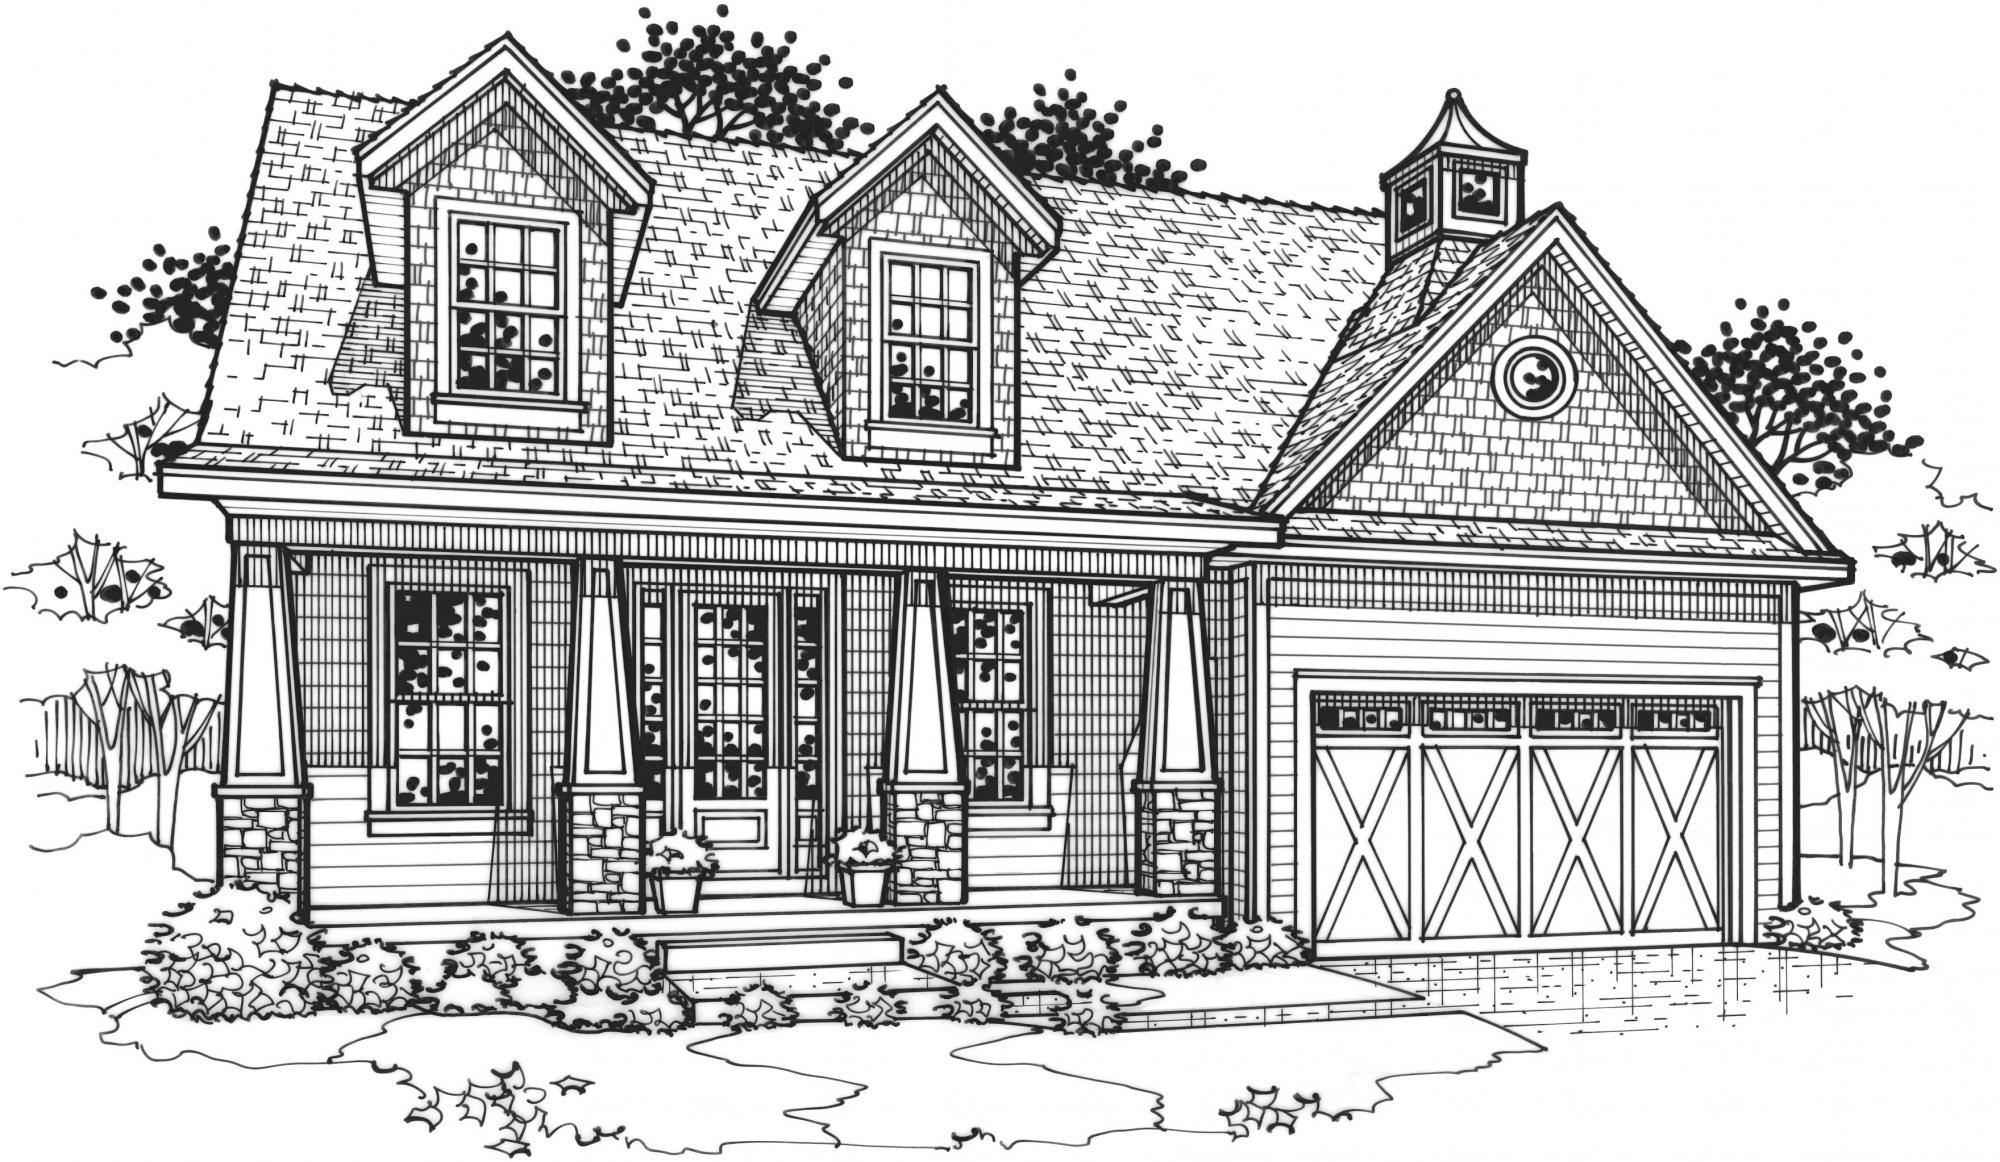 black and white rendering of a magnolia model from Lambie custom homes